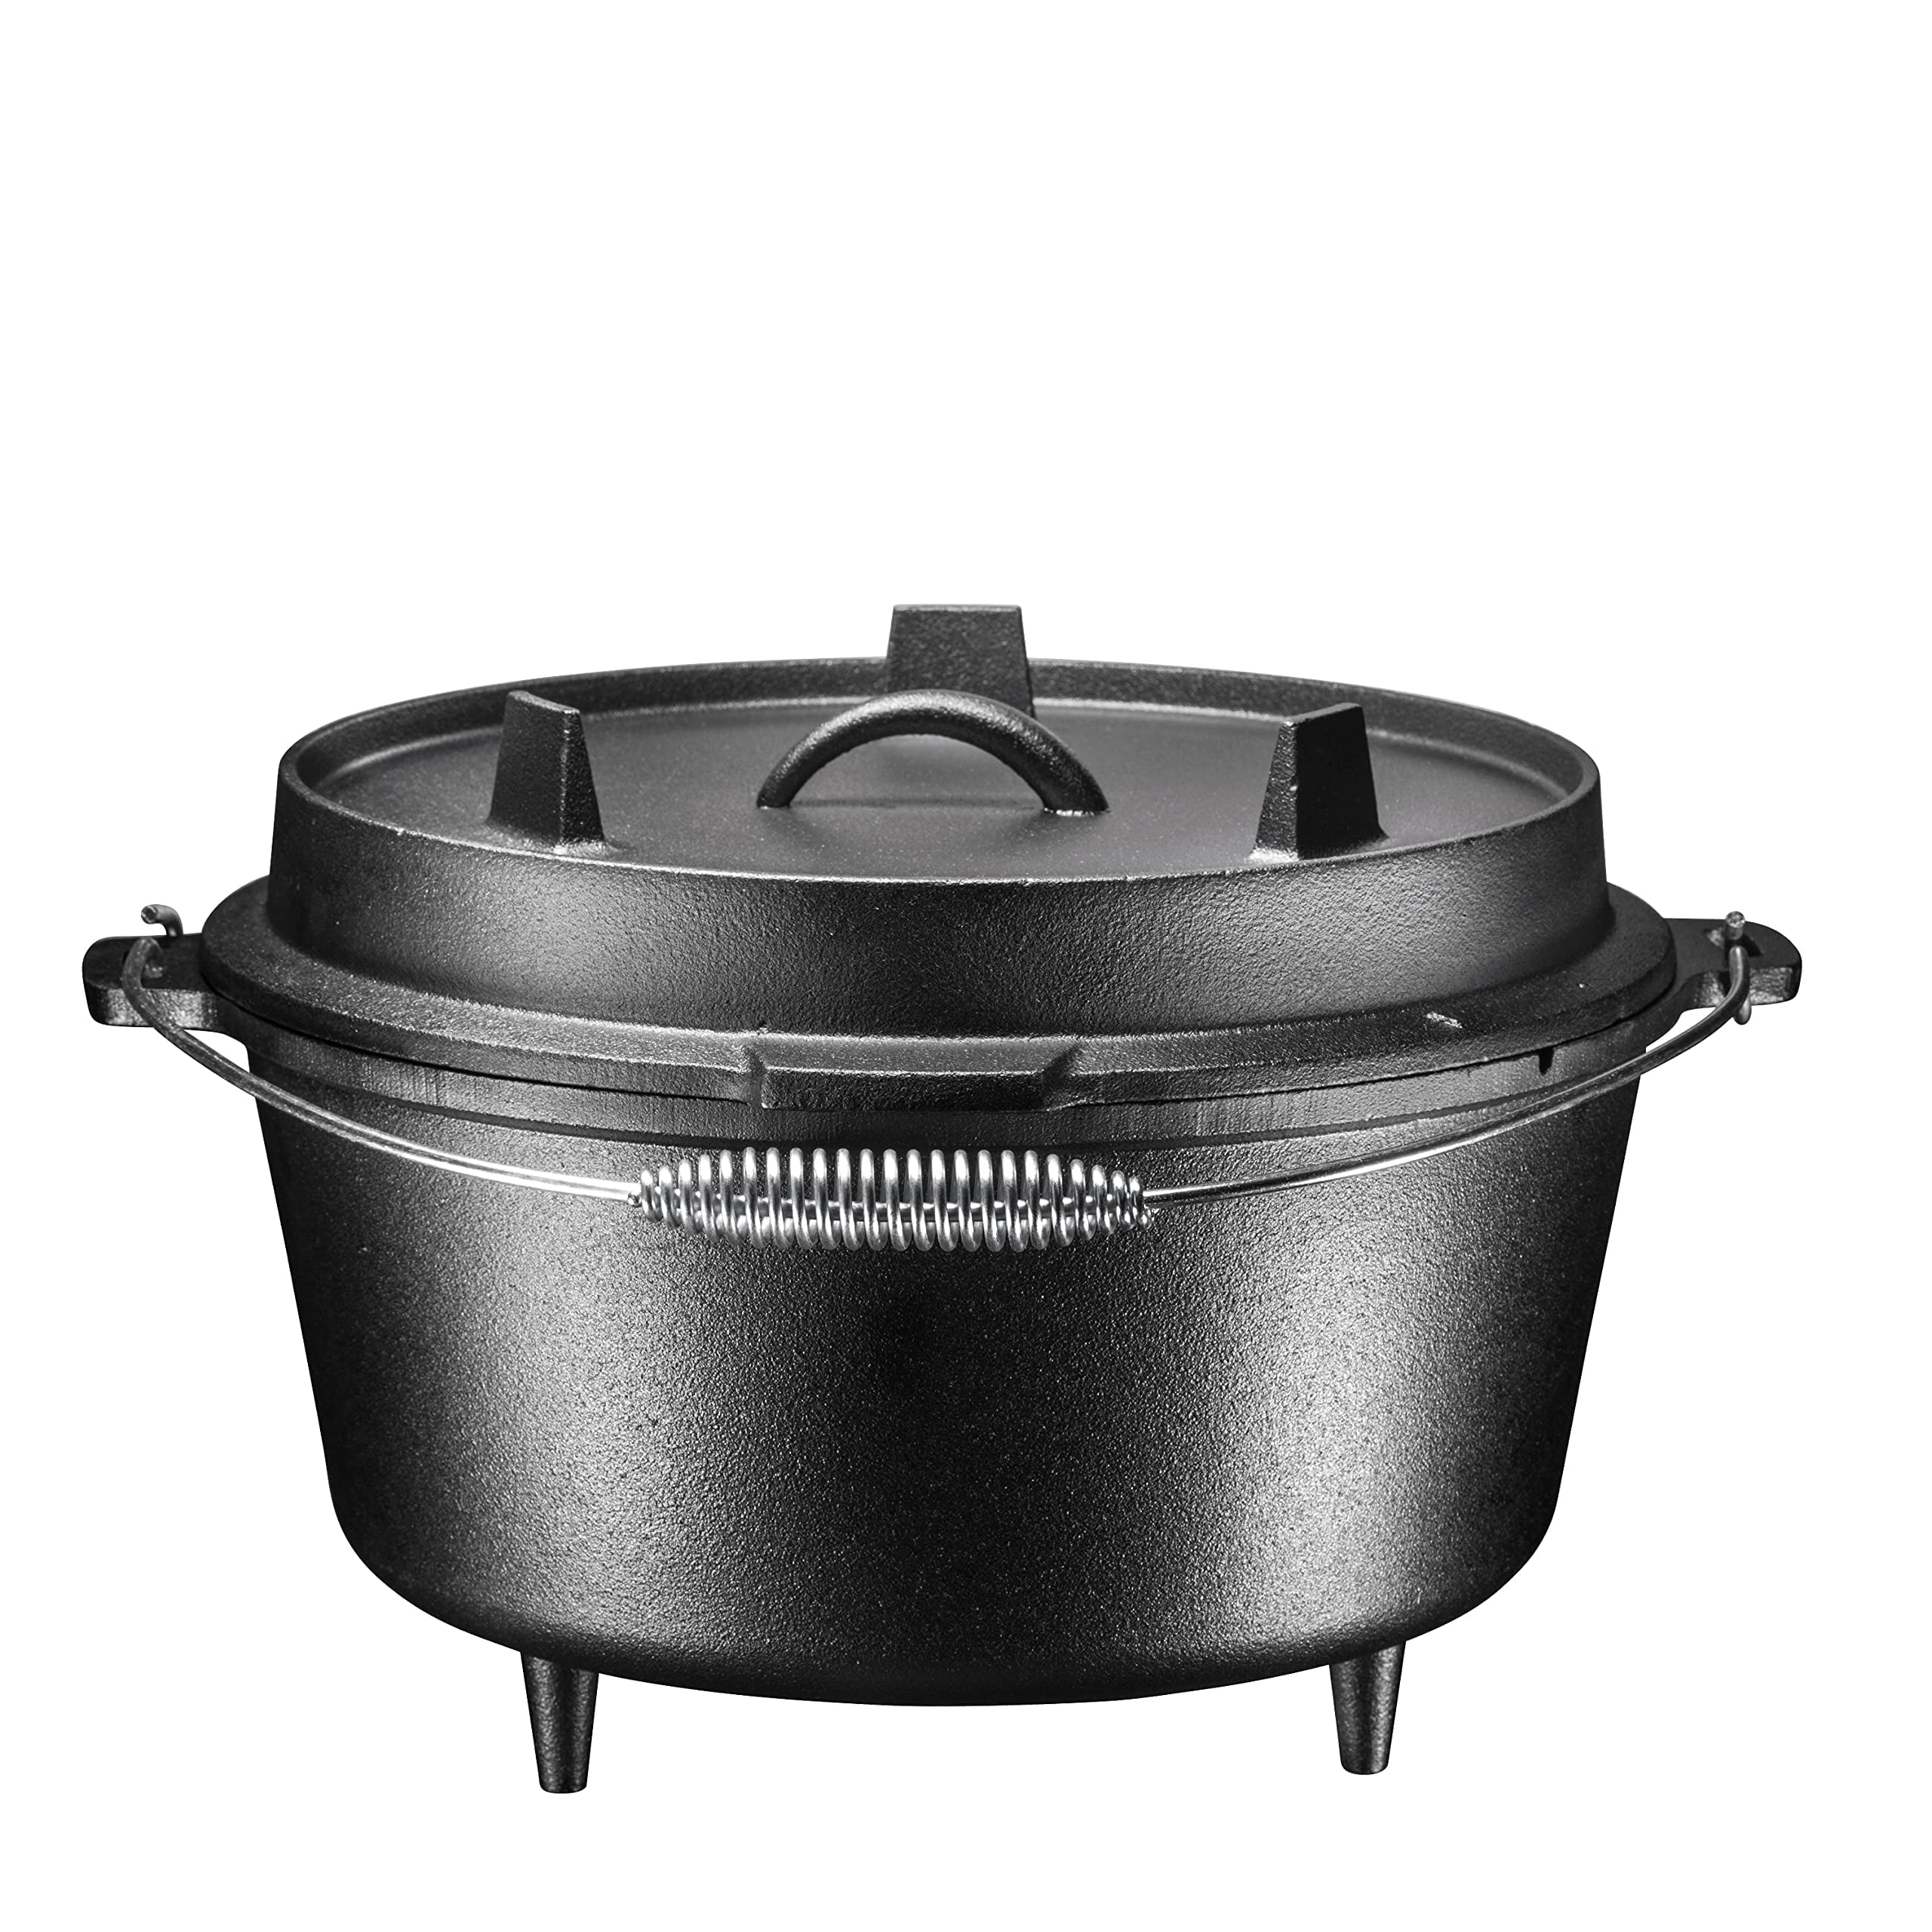 Lehman's Campfire Cooking Kettle Pot - Cast Iron Potje Dutch Oven with 3  Legs and Lid, 10.5 inch, 2 gallon 